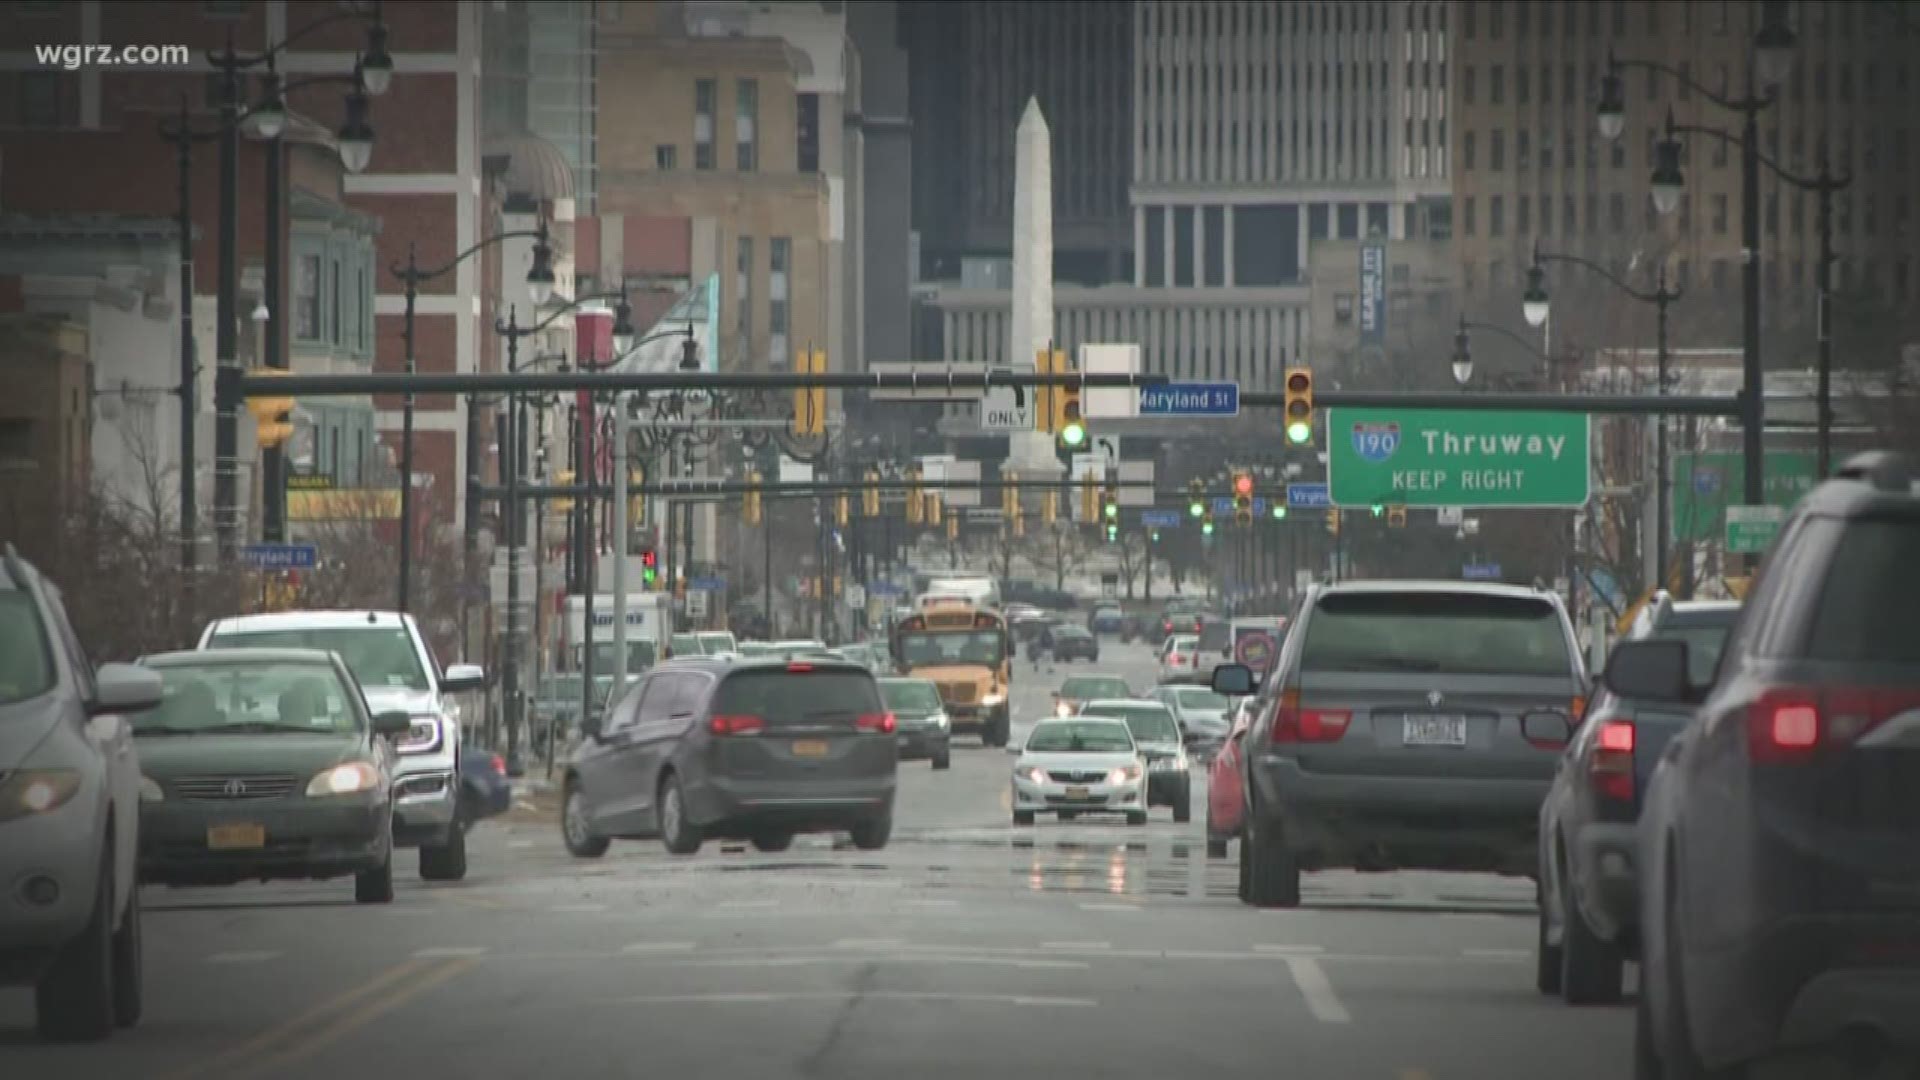 Saturday representatives from organizations like Congress for the New Urbanism and Stantec gathered in Buffalo to share recommendations for the city.